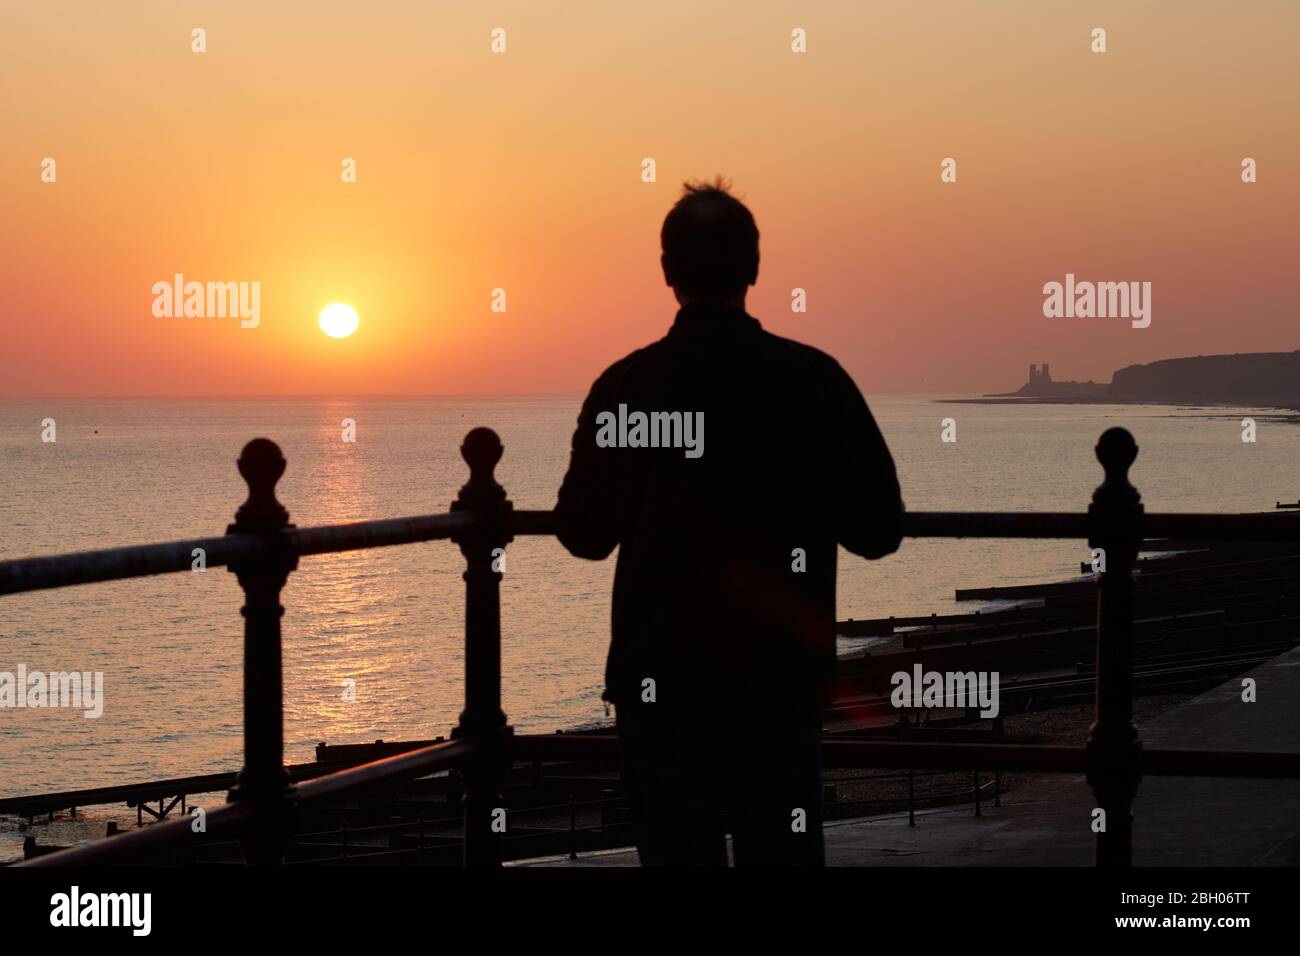 Herne Bay, Kent, UK. 23rd April 2020: UK Weather. A man watches the sunrise at Herne Bay in Kent on St Georges day and the 245th anniversary of the birthday of the painter JMW Turner thought to have been born on this day 1775. Turner painted many pictures on the North Kent coast and the scene with Reculver Towers on the right would have been a familiar sight which did feature in at least one painting. Credit: Alan Payton/Alamy Live News Stock Photo